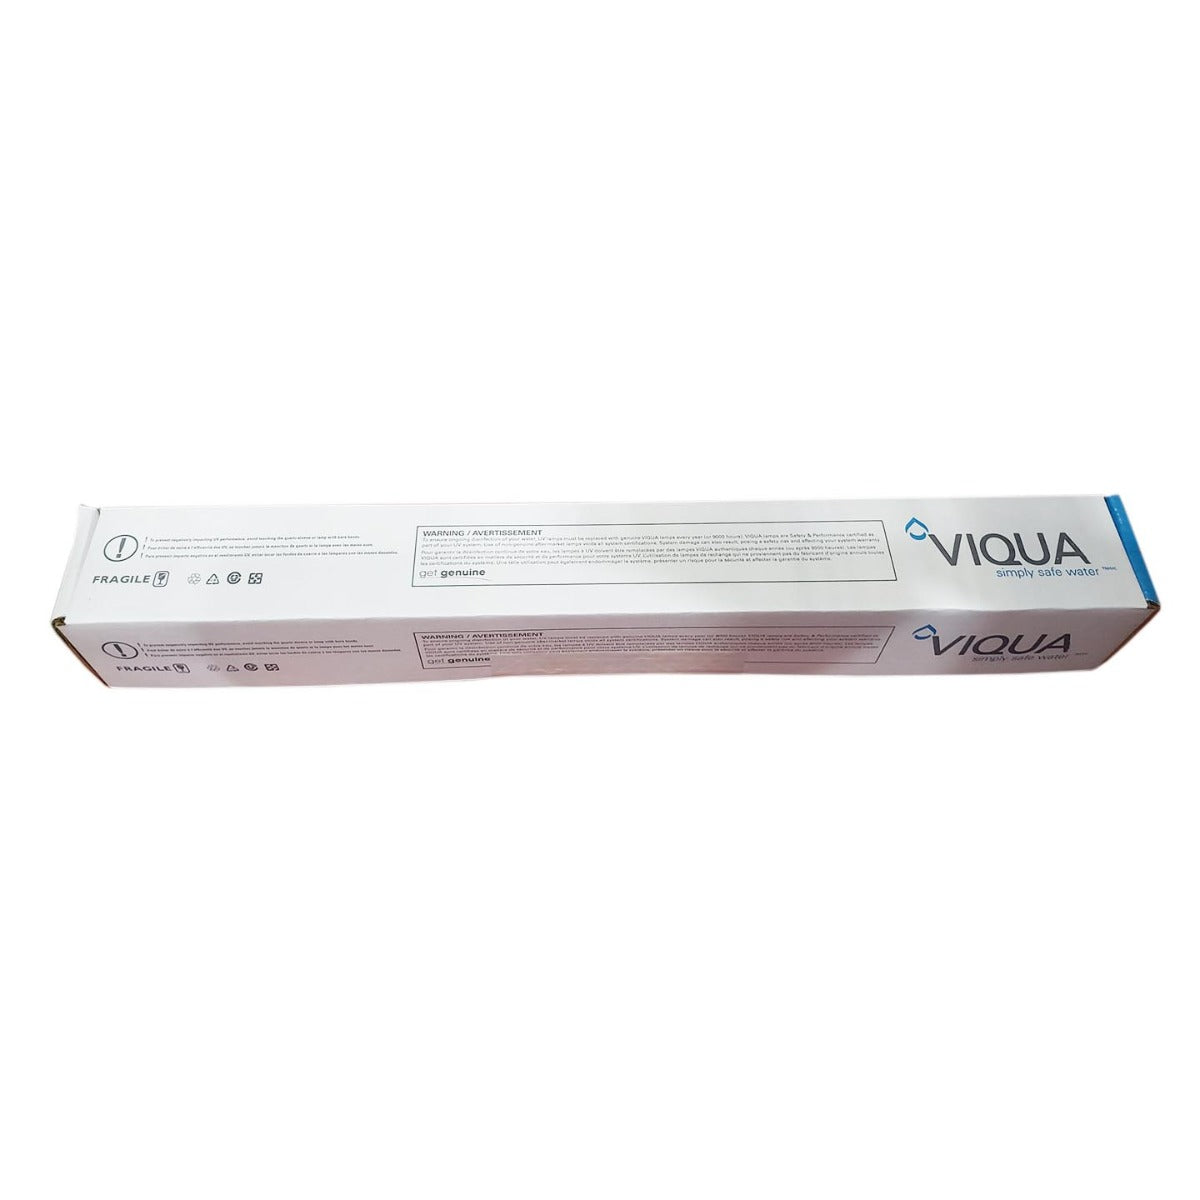 S330RL Water Disinfection System UV Lamp by Viqua